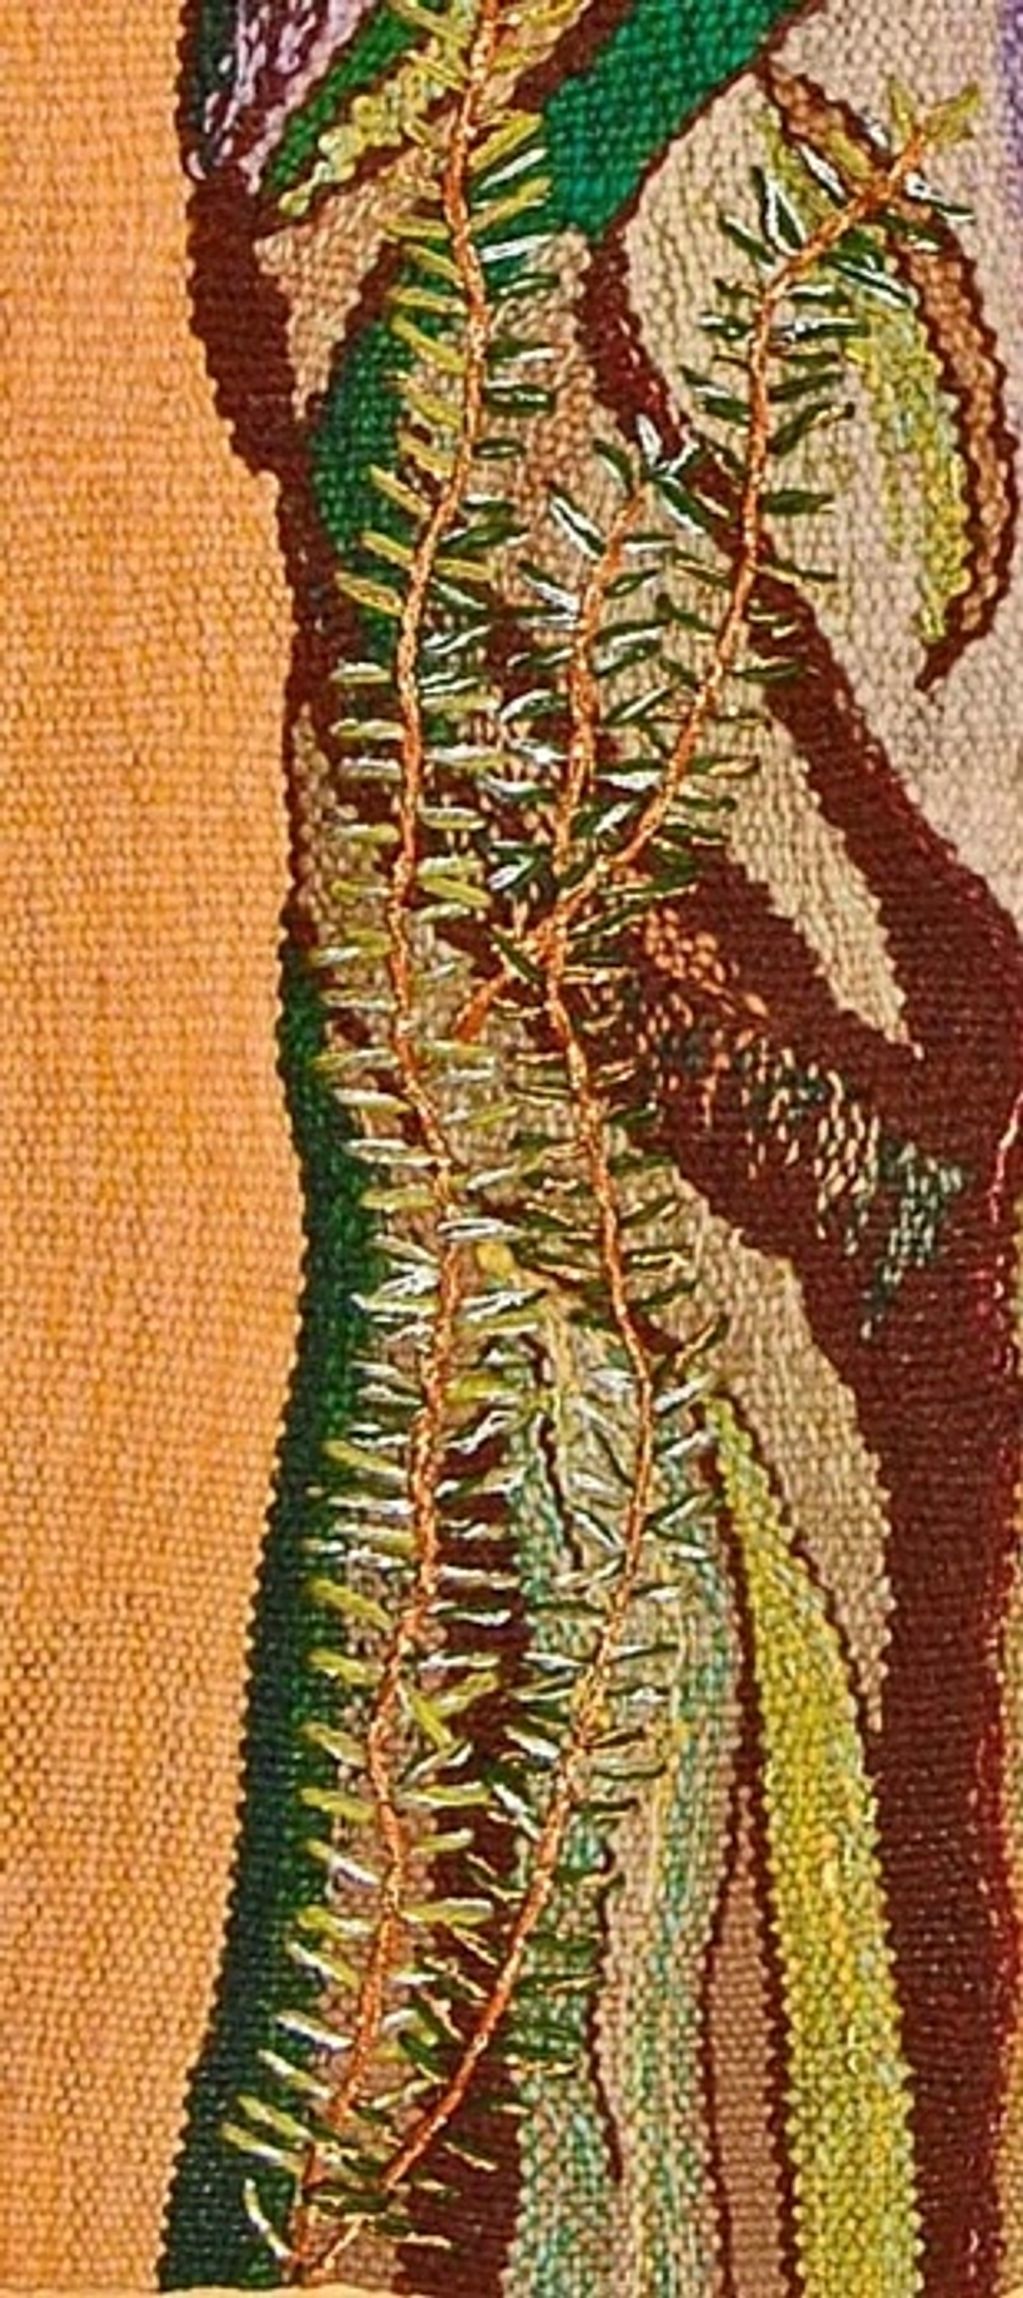 Tree trunk 2 
with embroidery